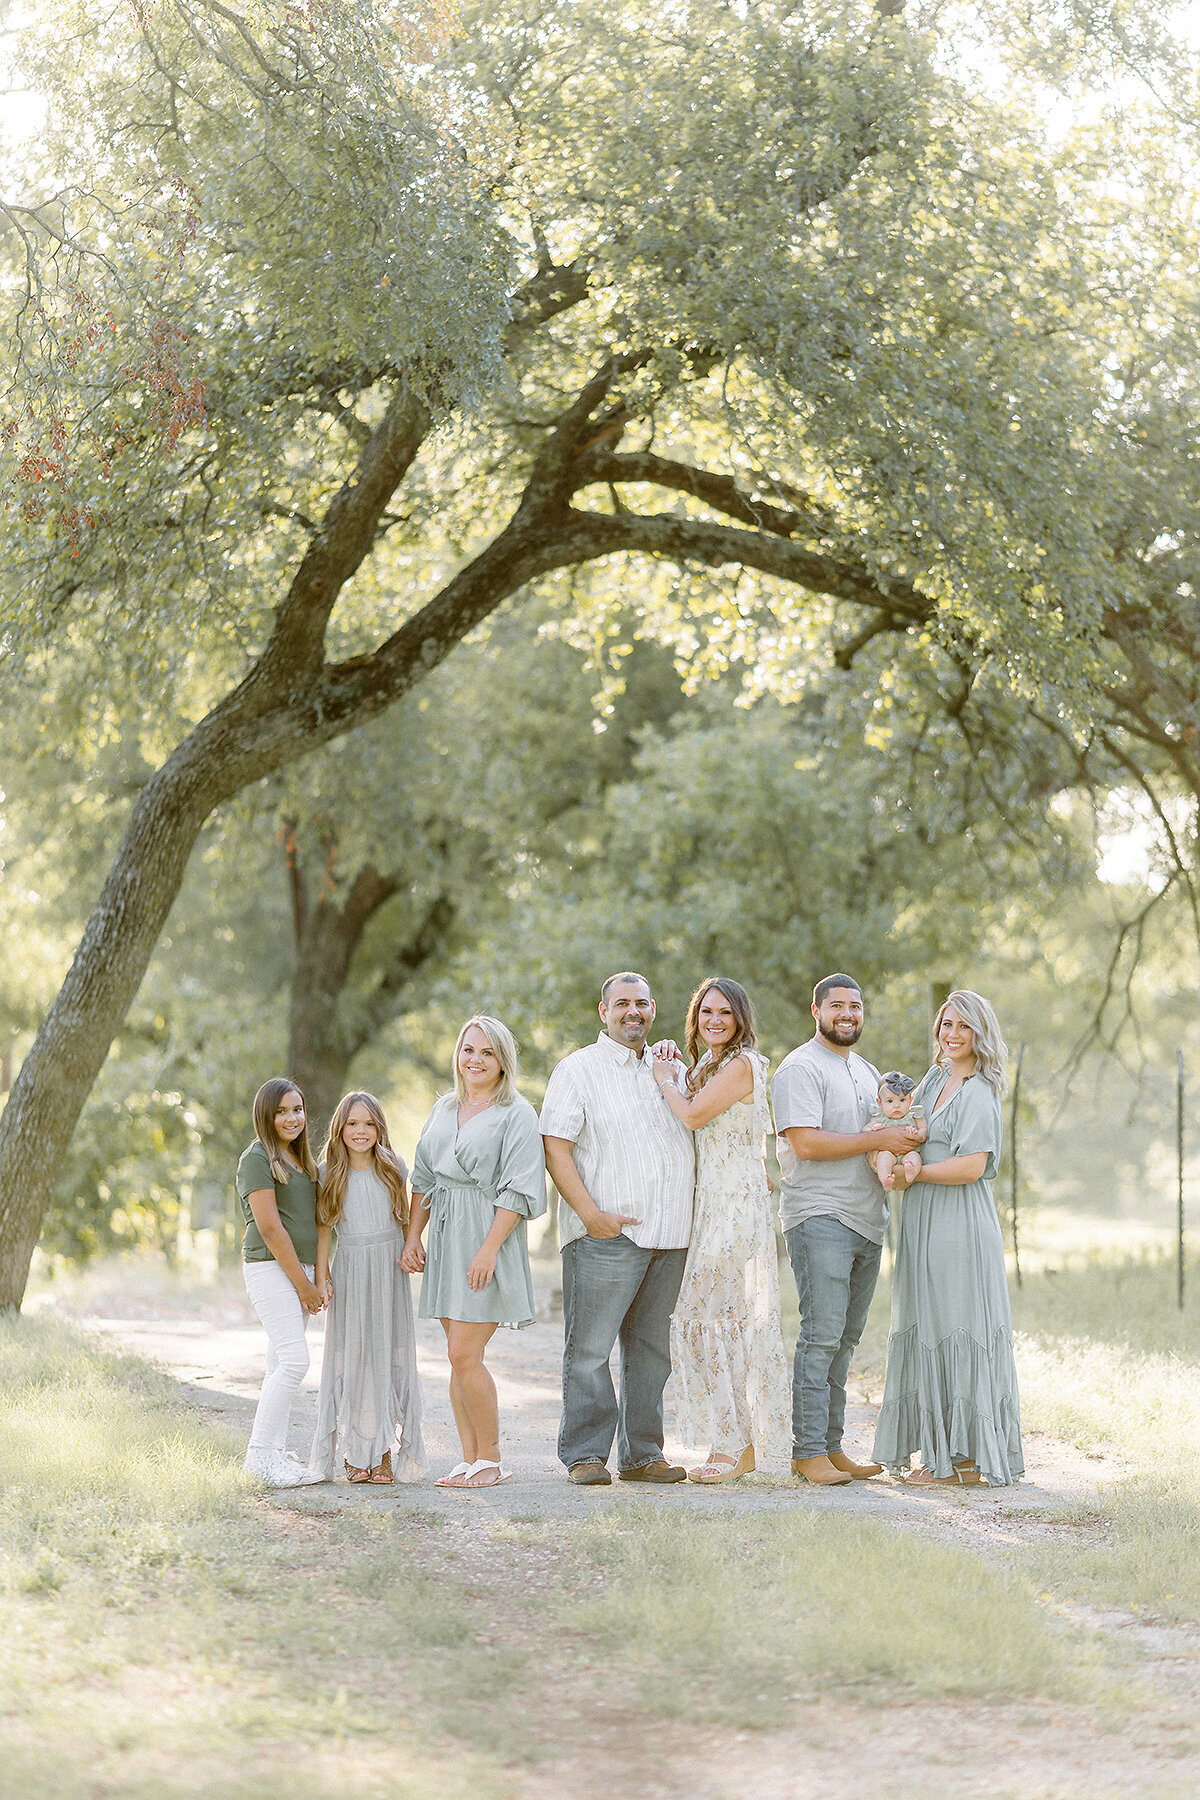 A Dallas family photo taken while they are posing close together in the middle of a path at a local Dallas/Fort Worth park for their family portrait session.